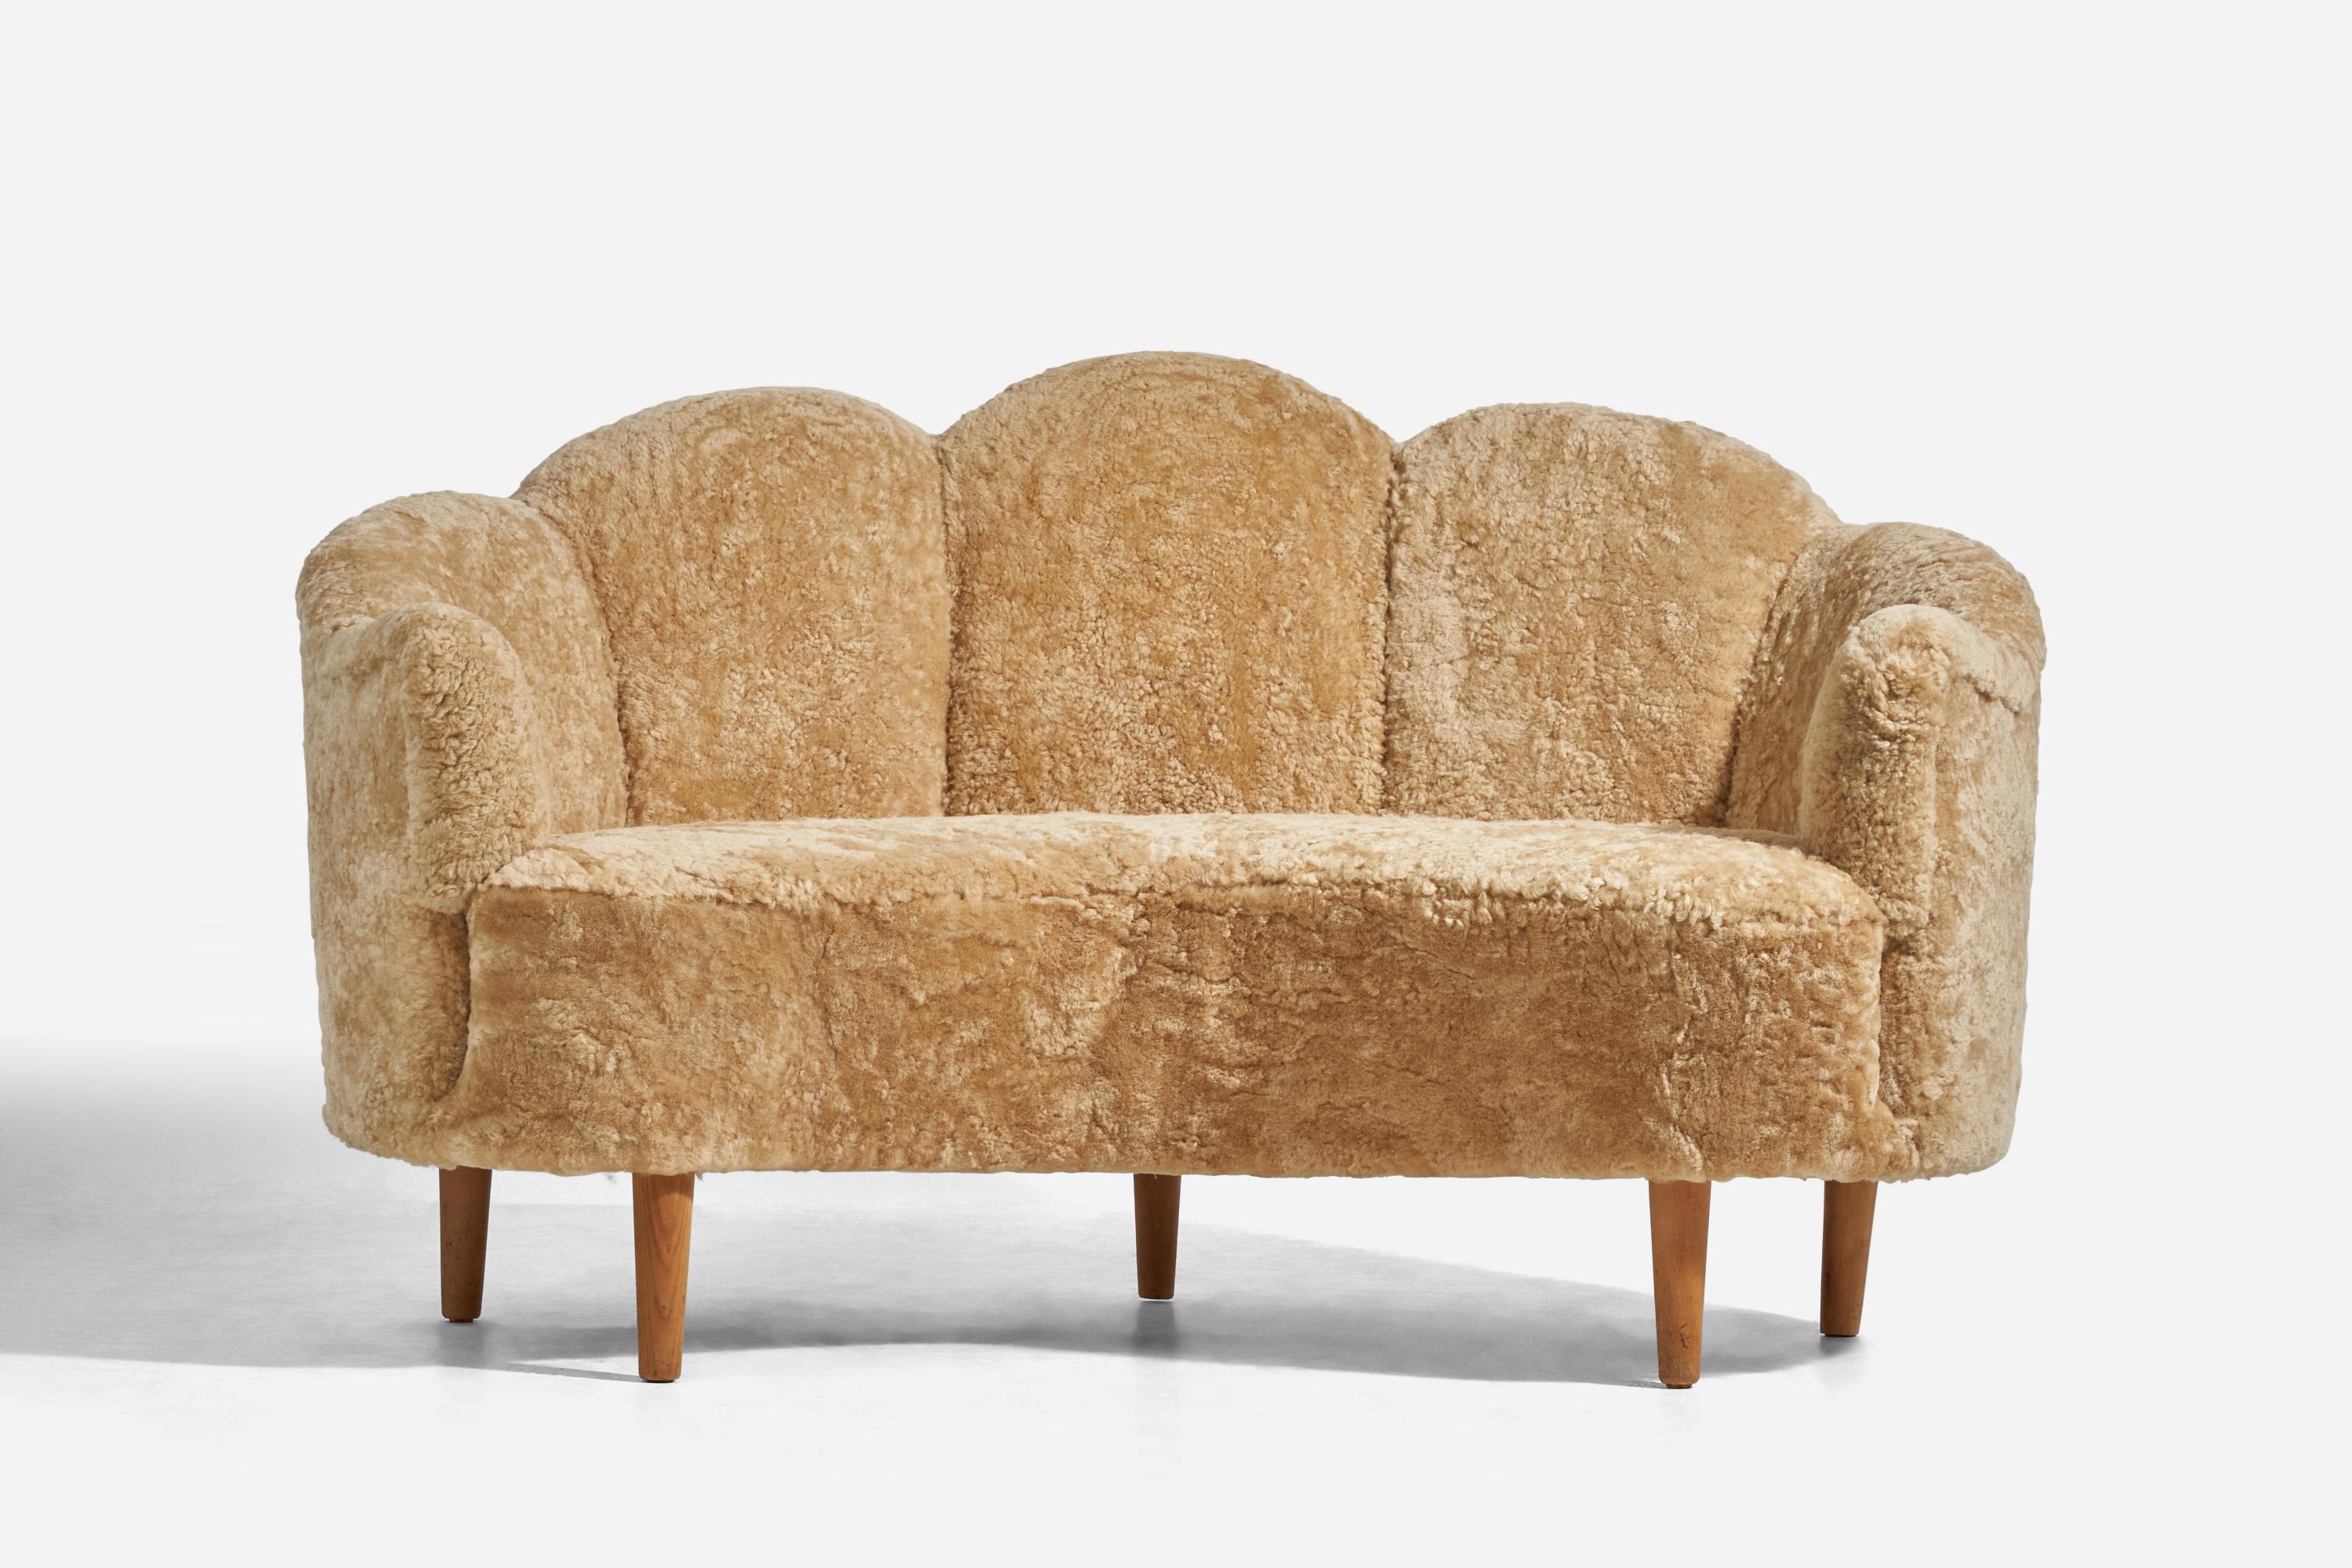 A sheepskin and wood sofa designed and produced in Denmark, c. 1940s.